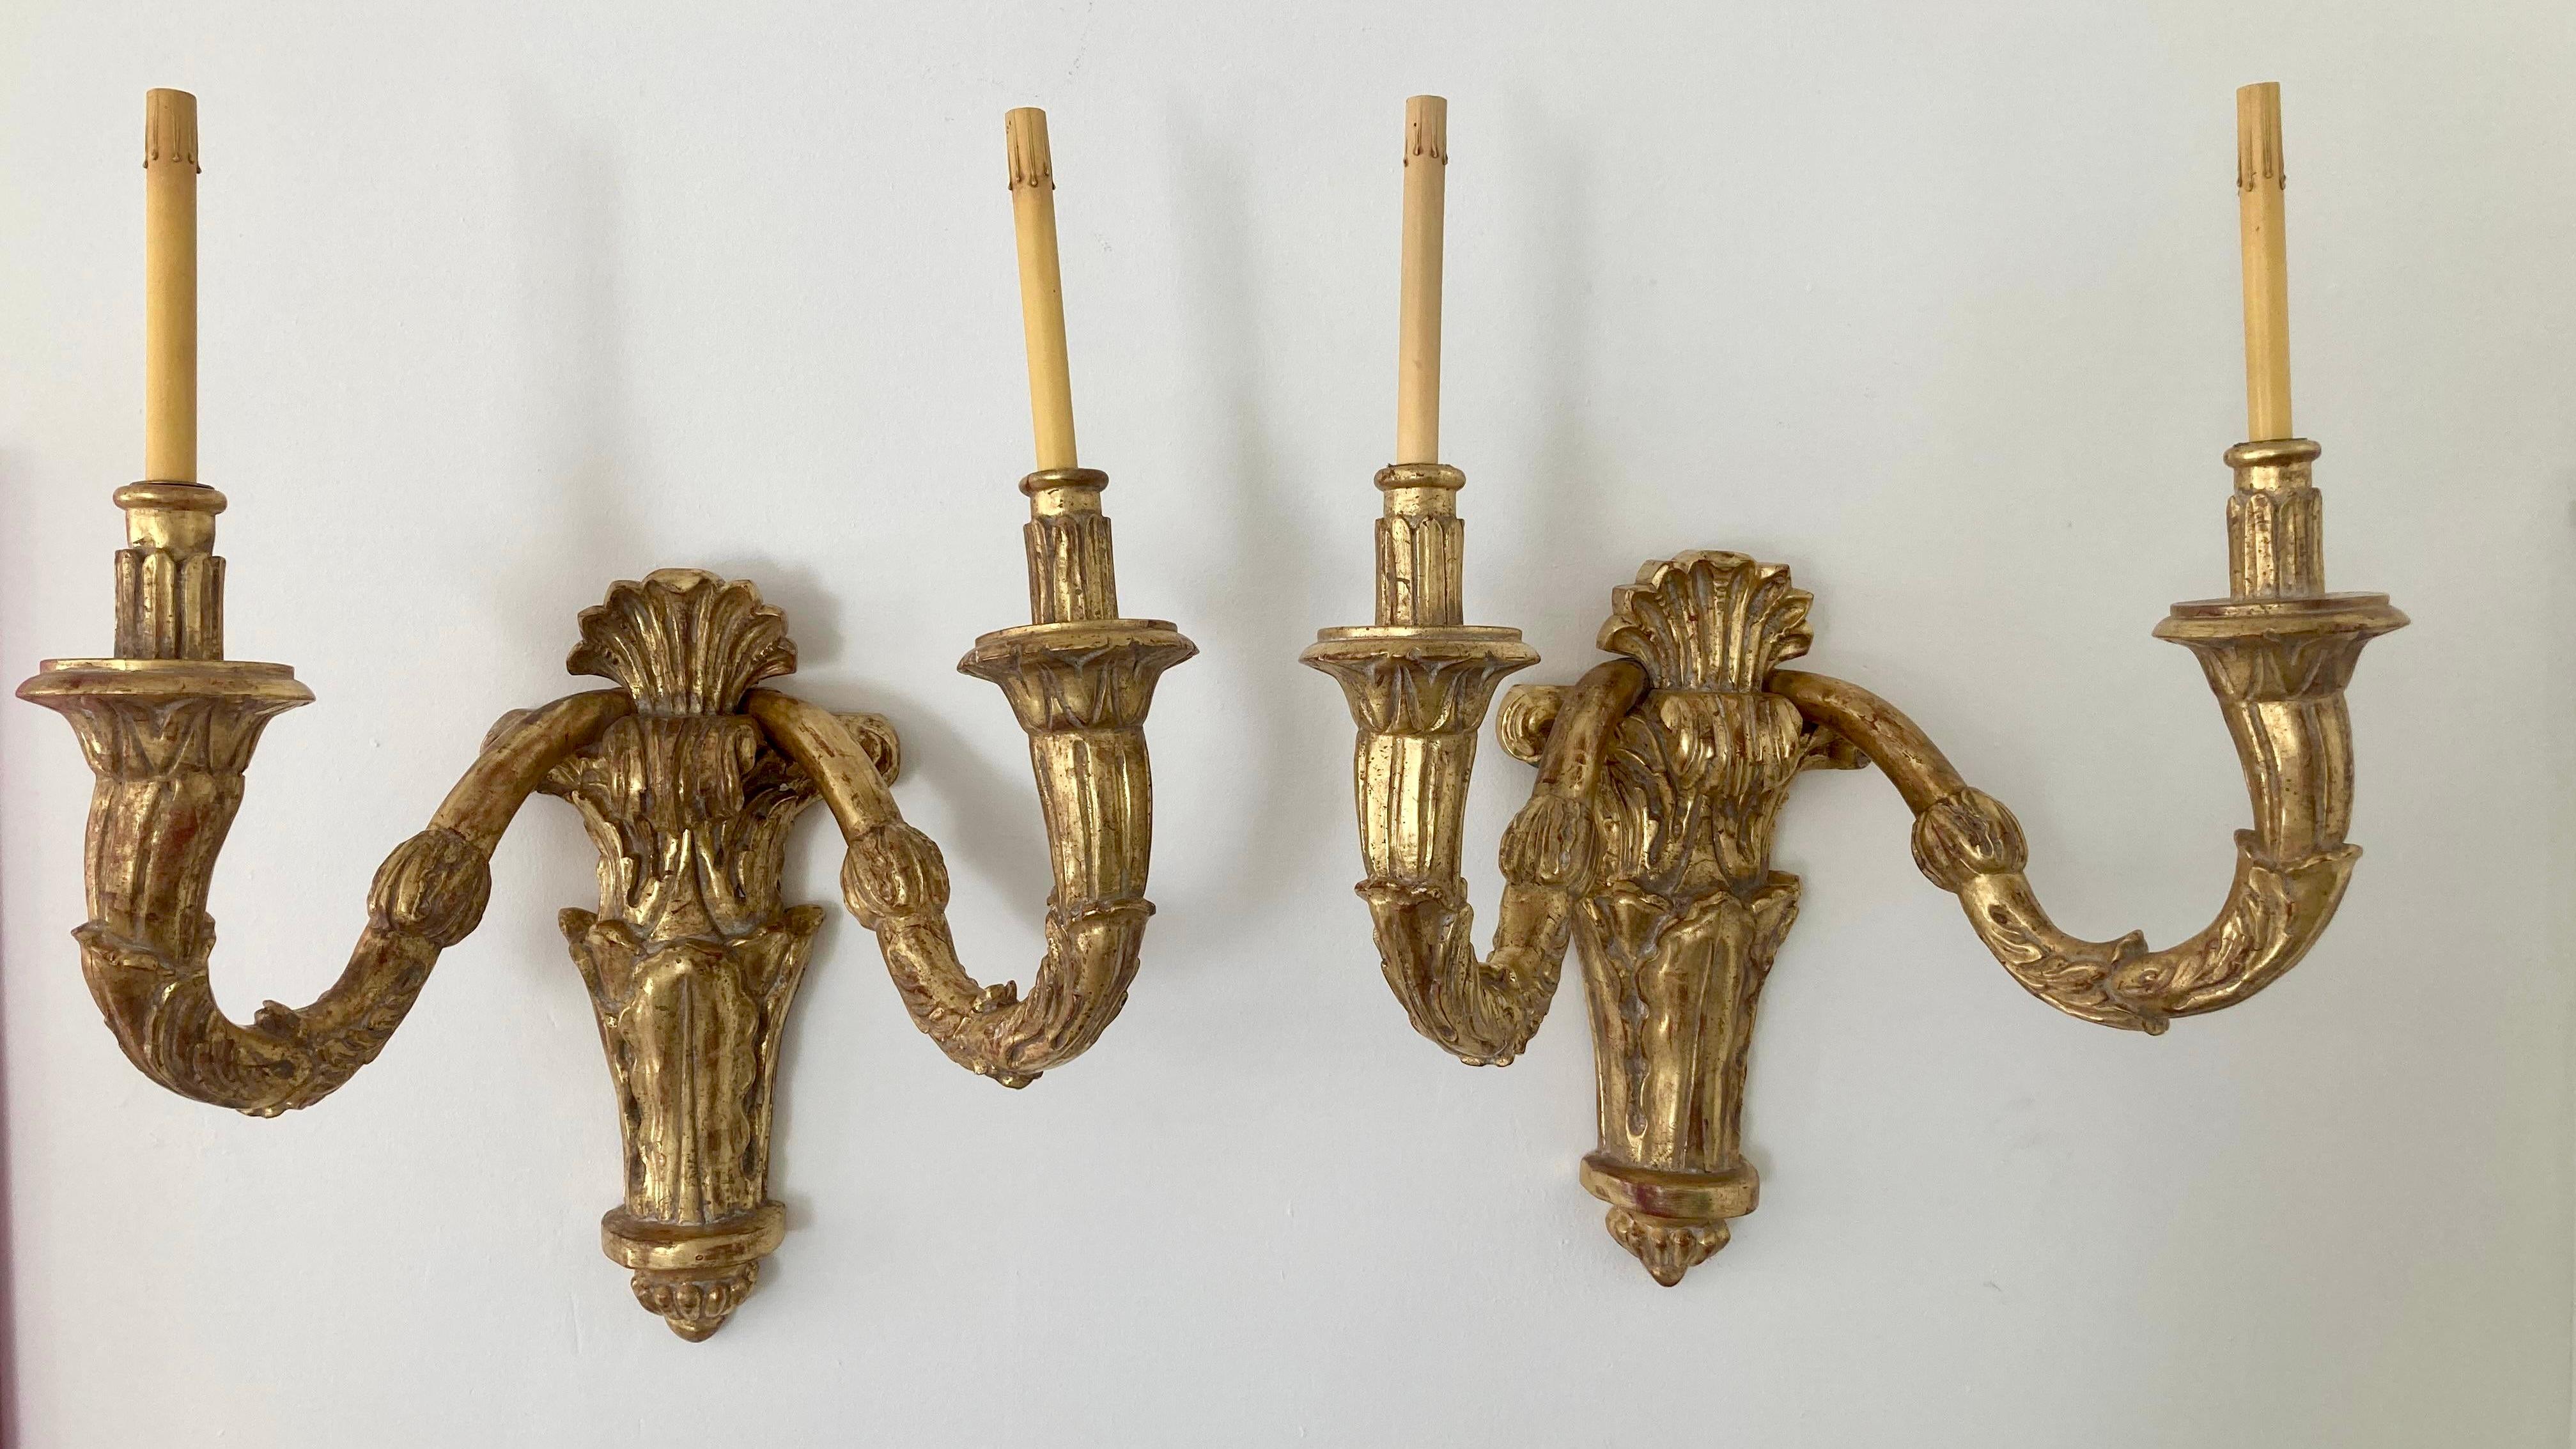 Very large scale pair of carved gilt wood wall sconces in a French Louis XVI Style. Very dramatic oversized scale will certainly add some French Style to your home. We actually have 2 pairs available in inventory.